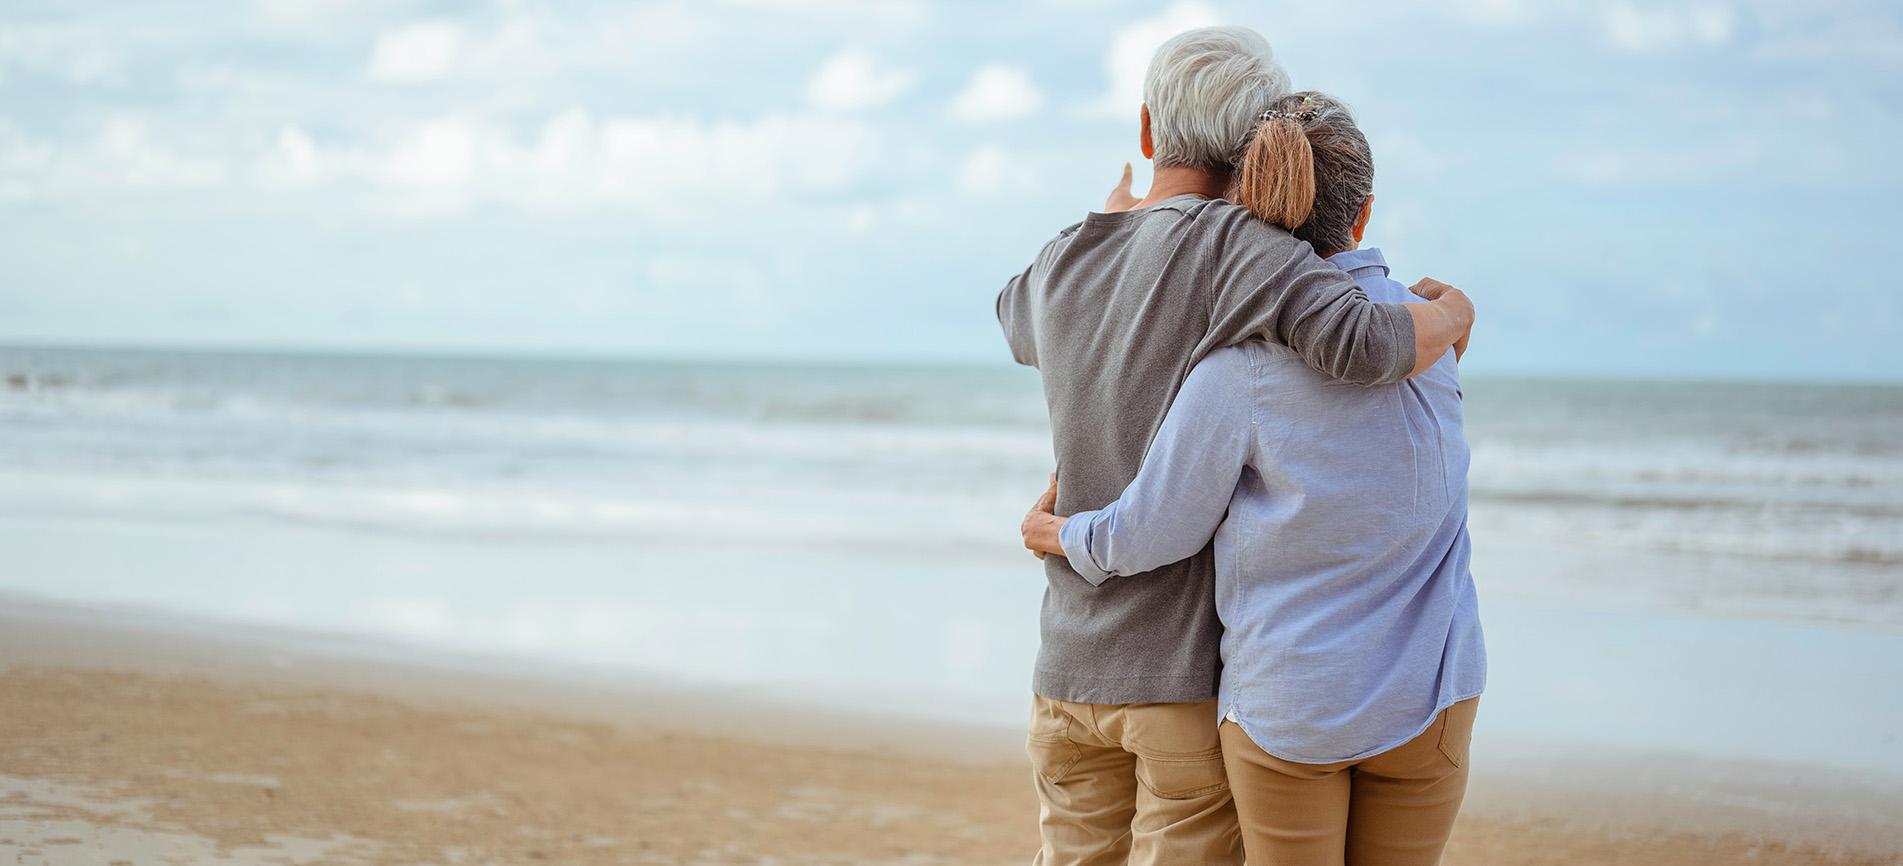 An older couple in an embrace standing on the beach while looking out and pointing to the sea.